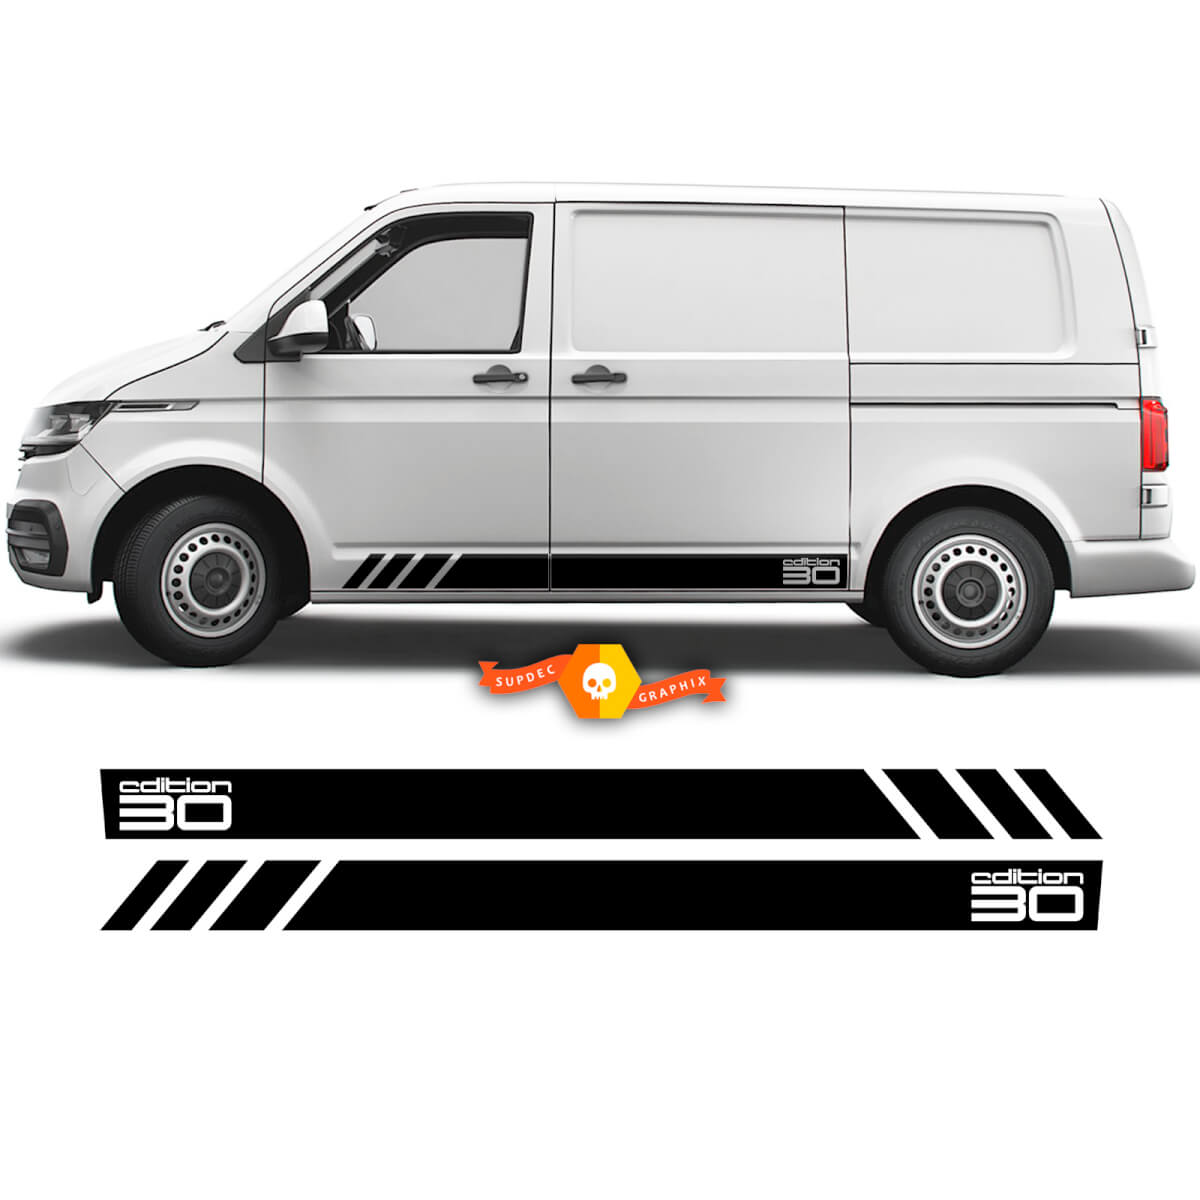 Adhesive decals for vw transporter